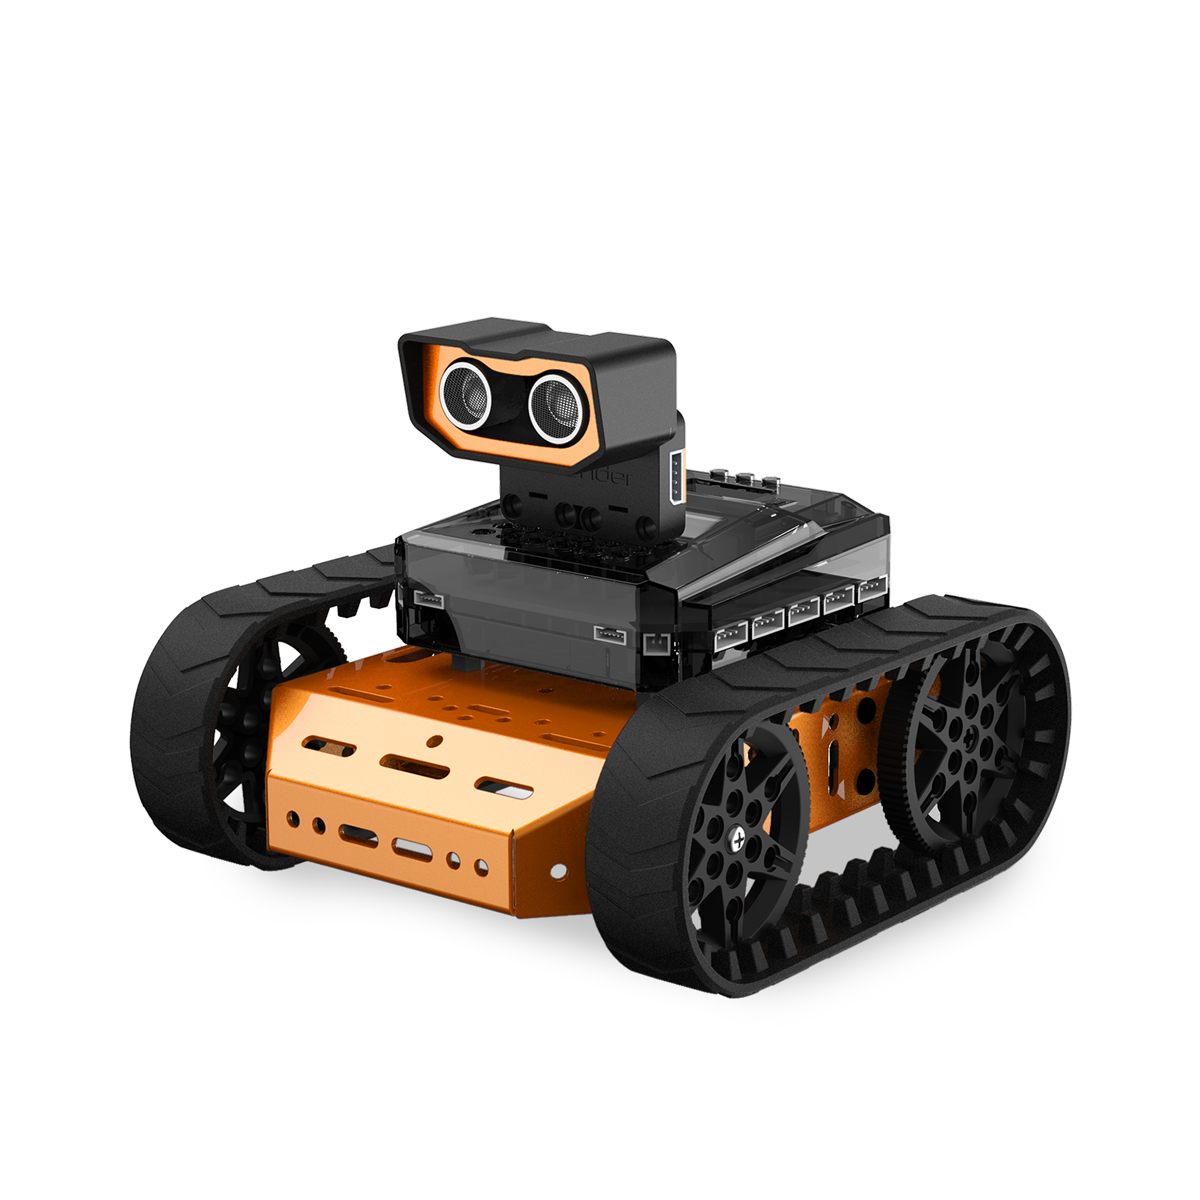 Qdee: The Best micro:bit Programmable Robot Kit with Infinite Configurations